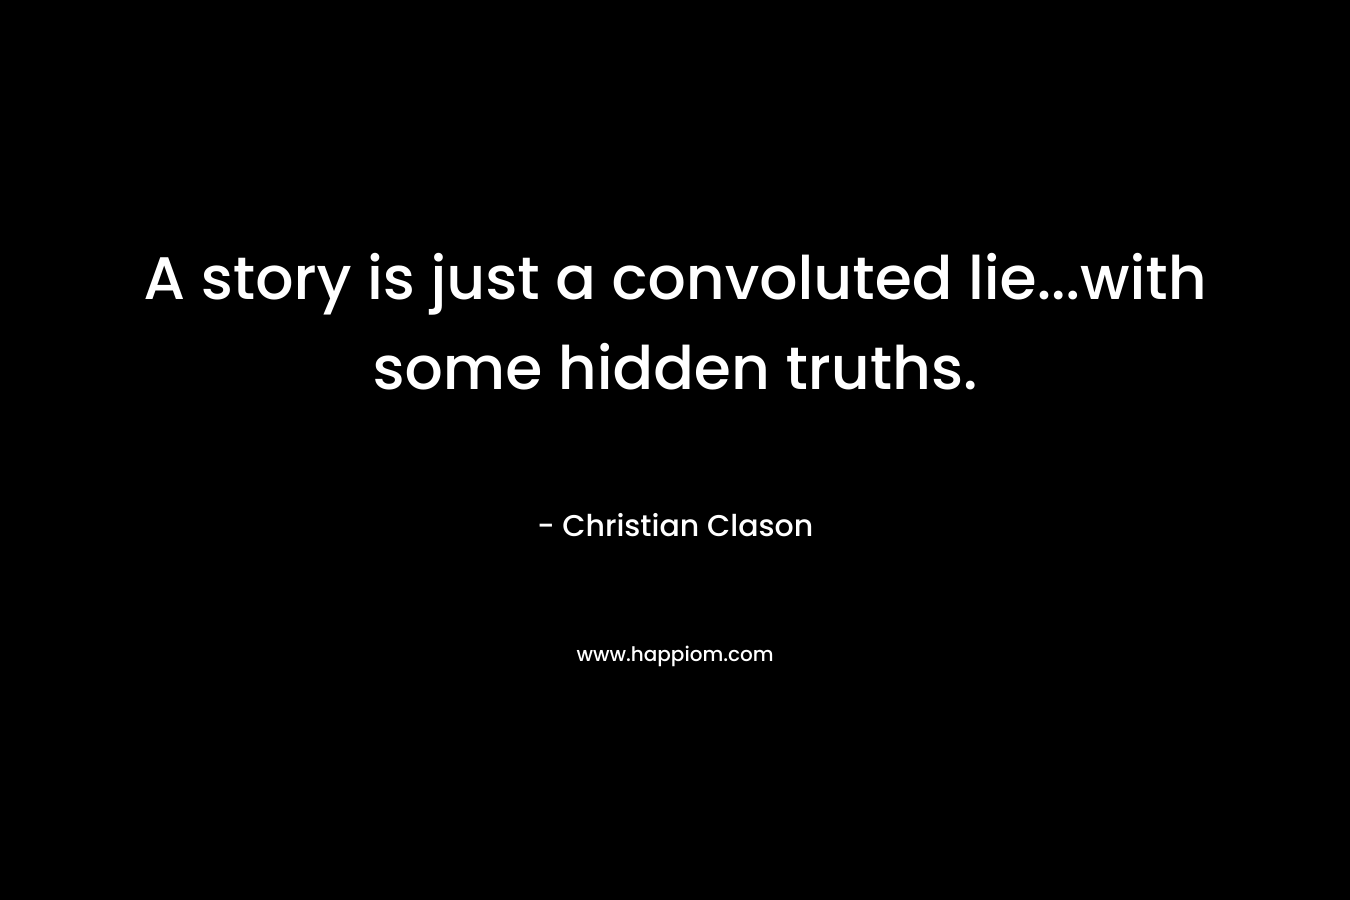 A story is just a convoluted lie...with some hidden truths.